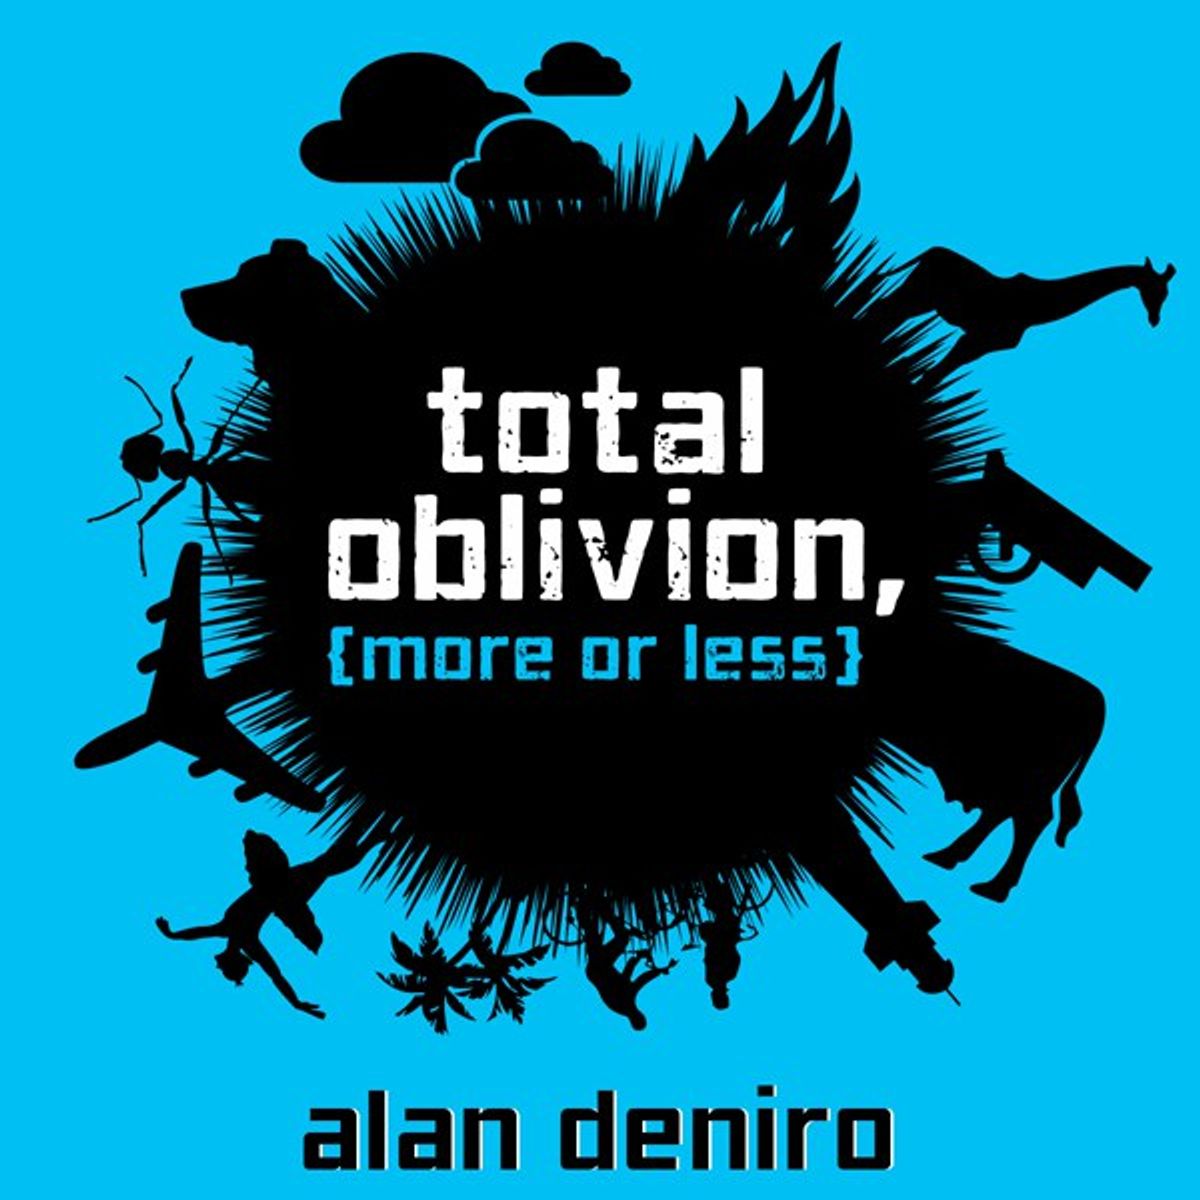 Book Recommendations: "Total Oblivion, More Or Less"